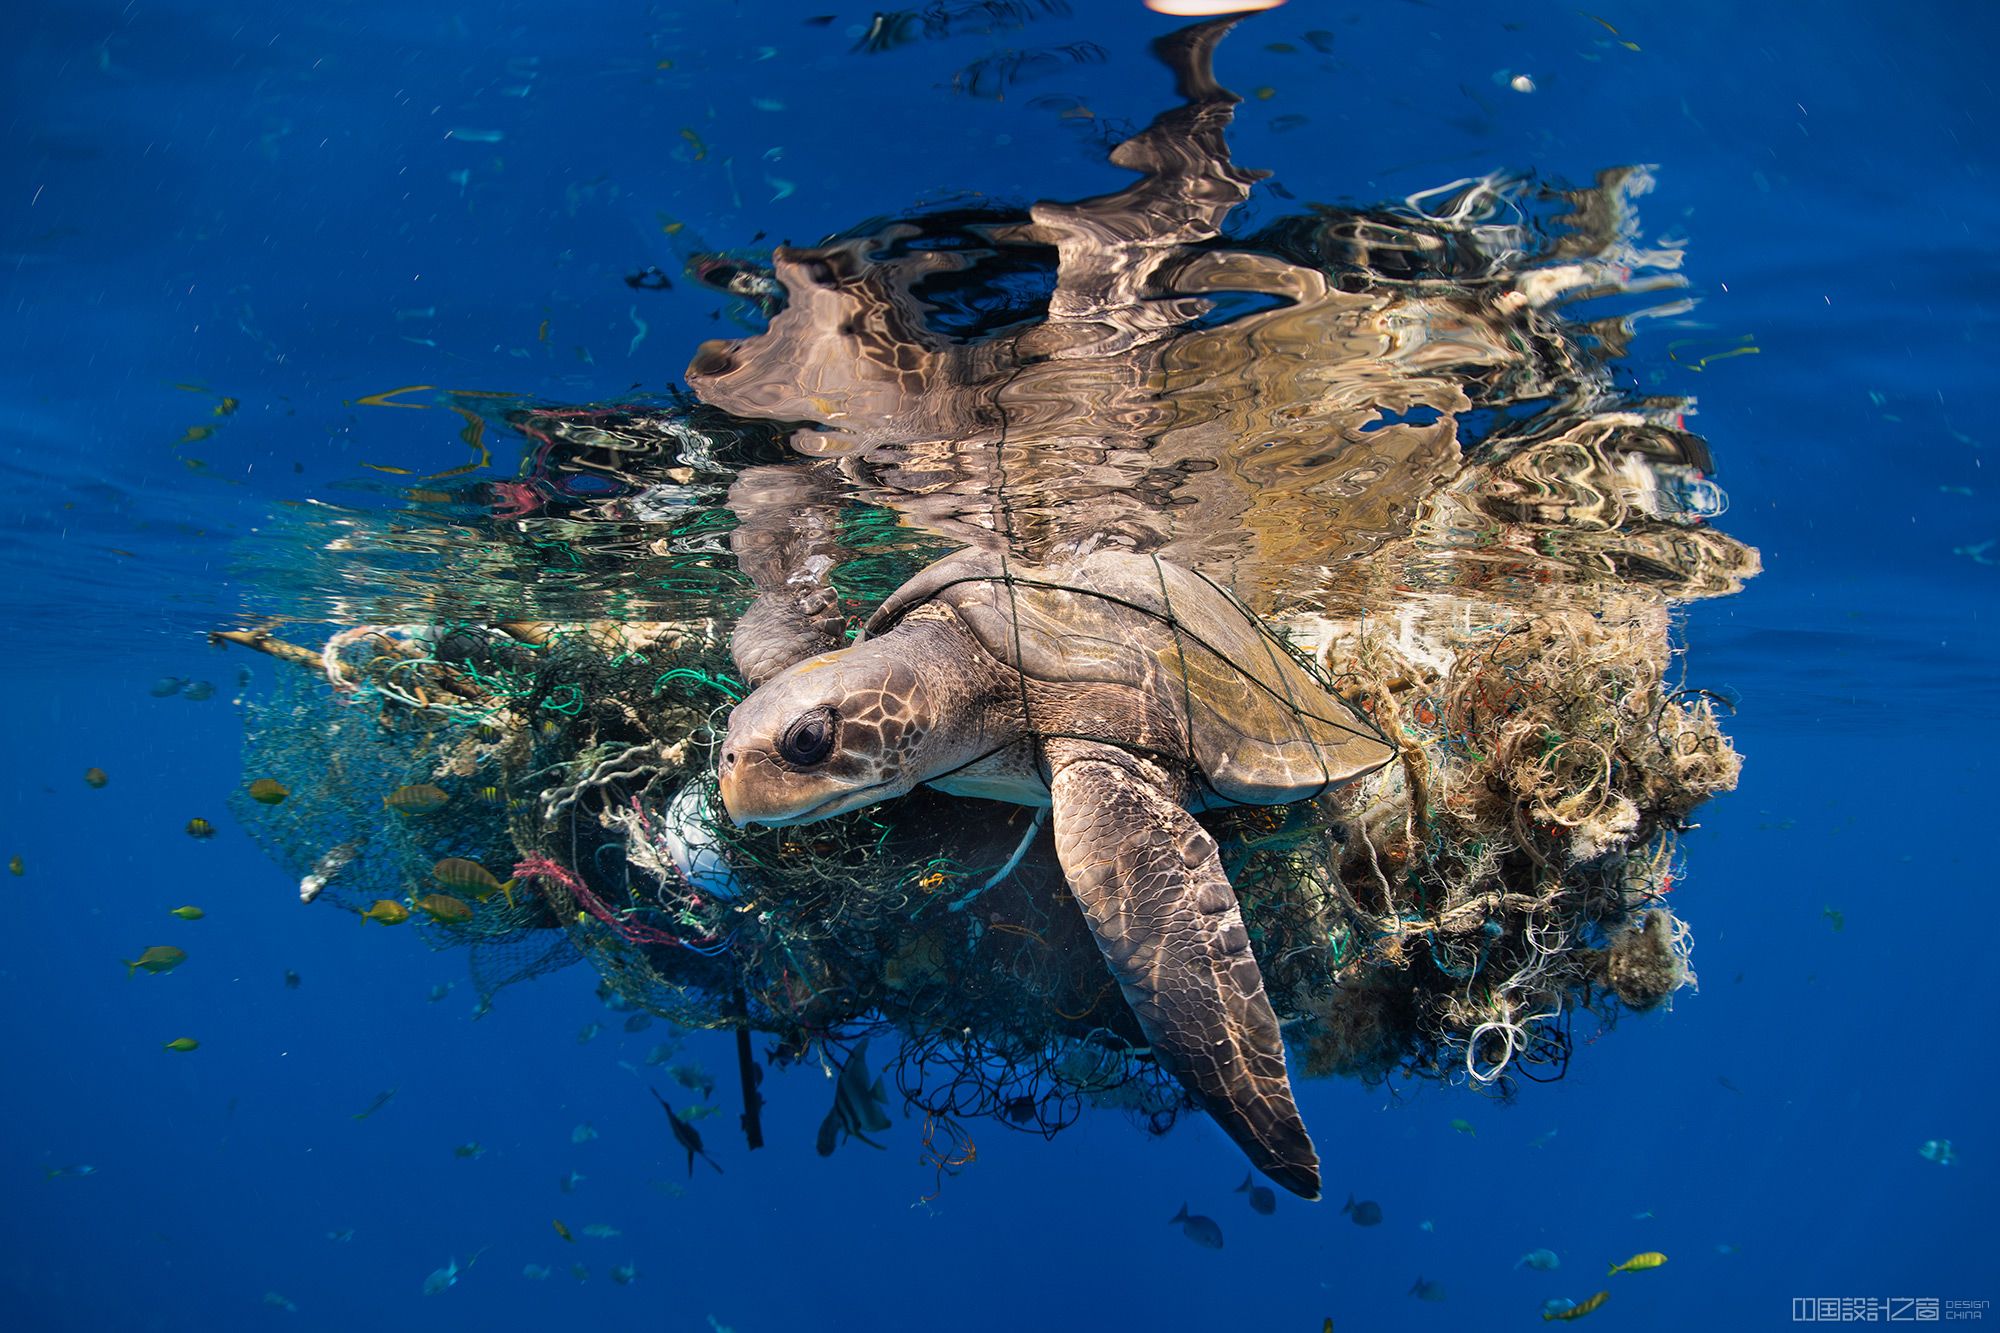 An underwater photo of a turtle trapped in garbage